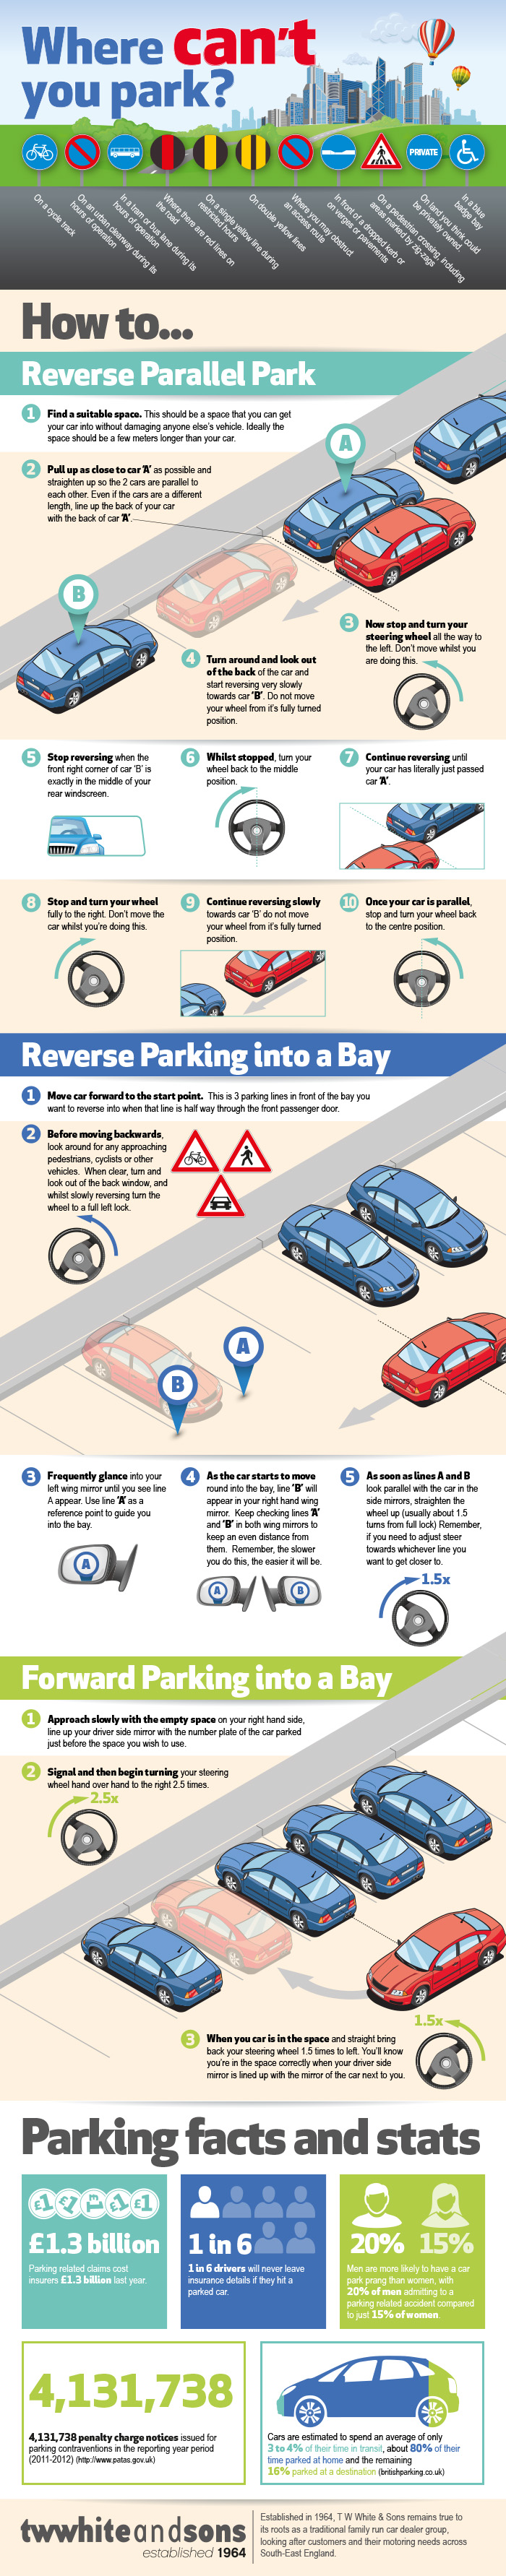 Parking Guide Infographic